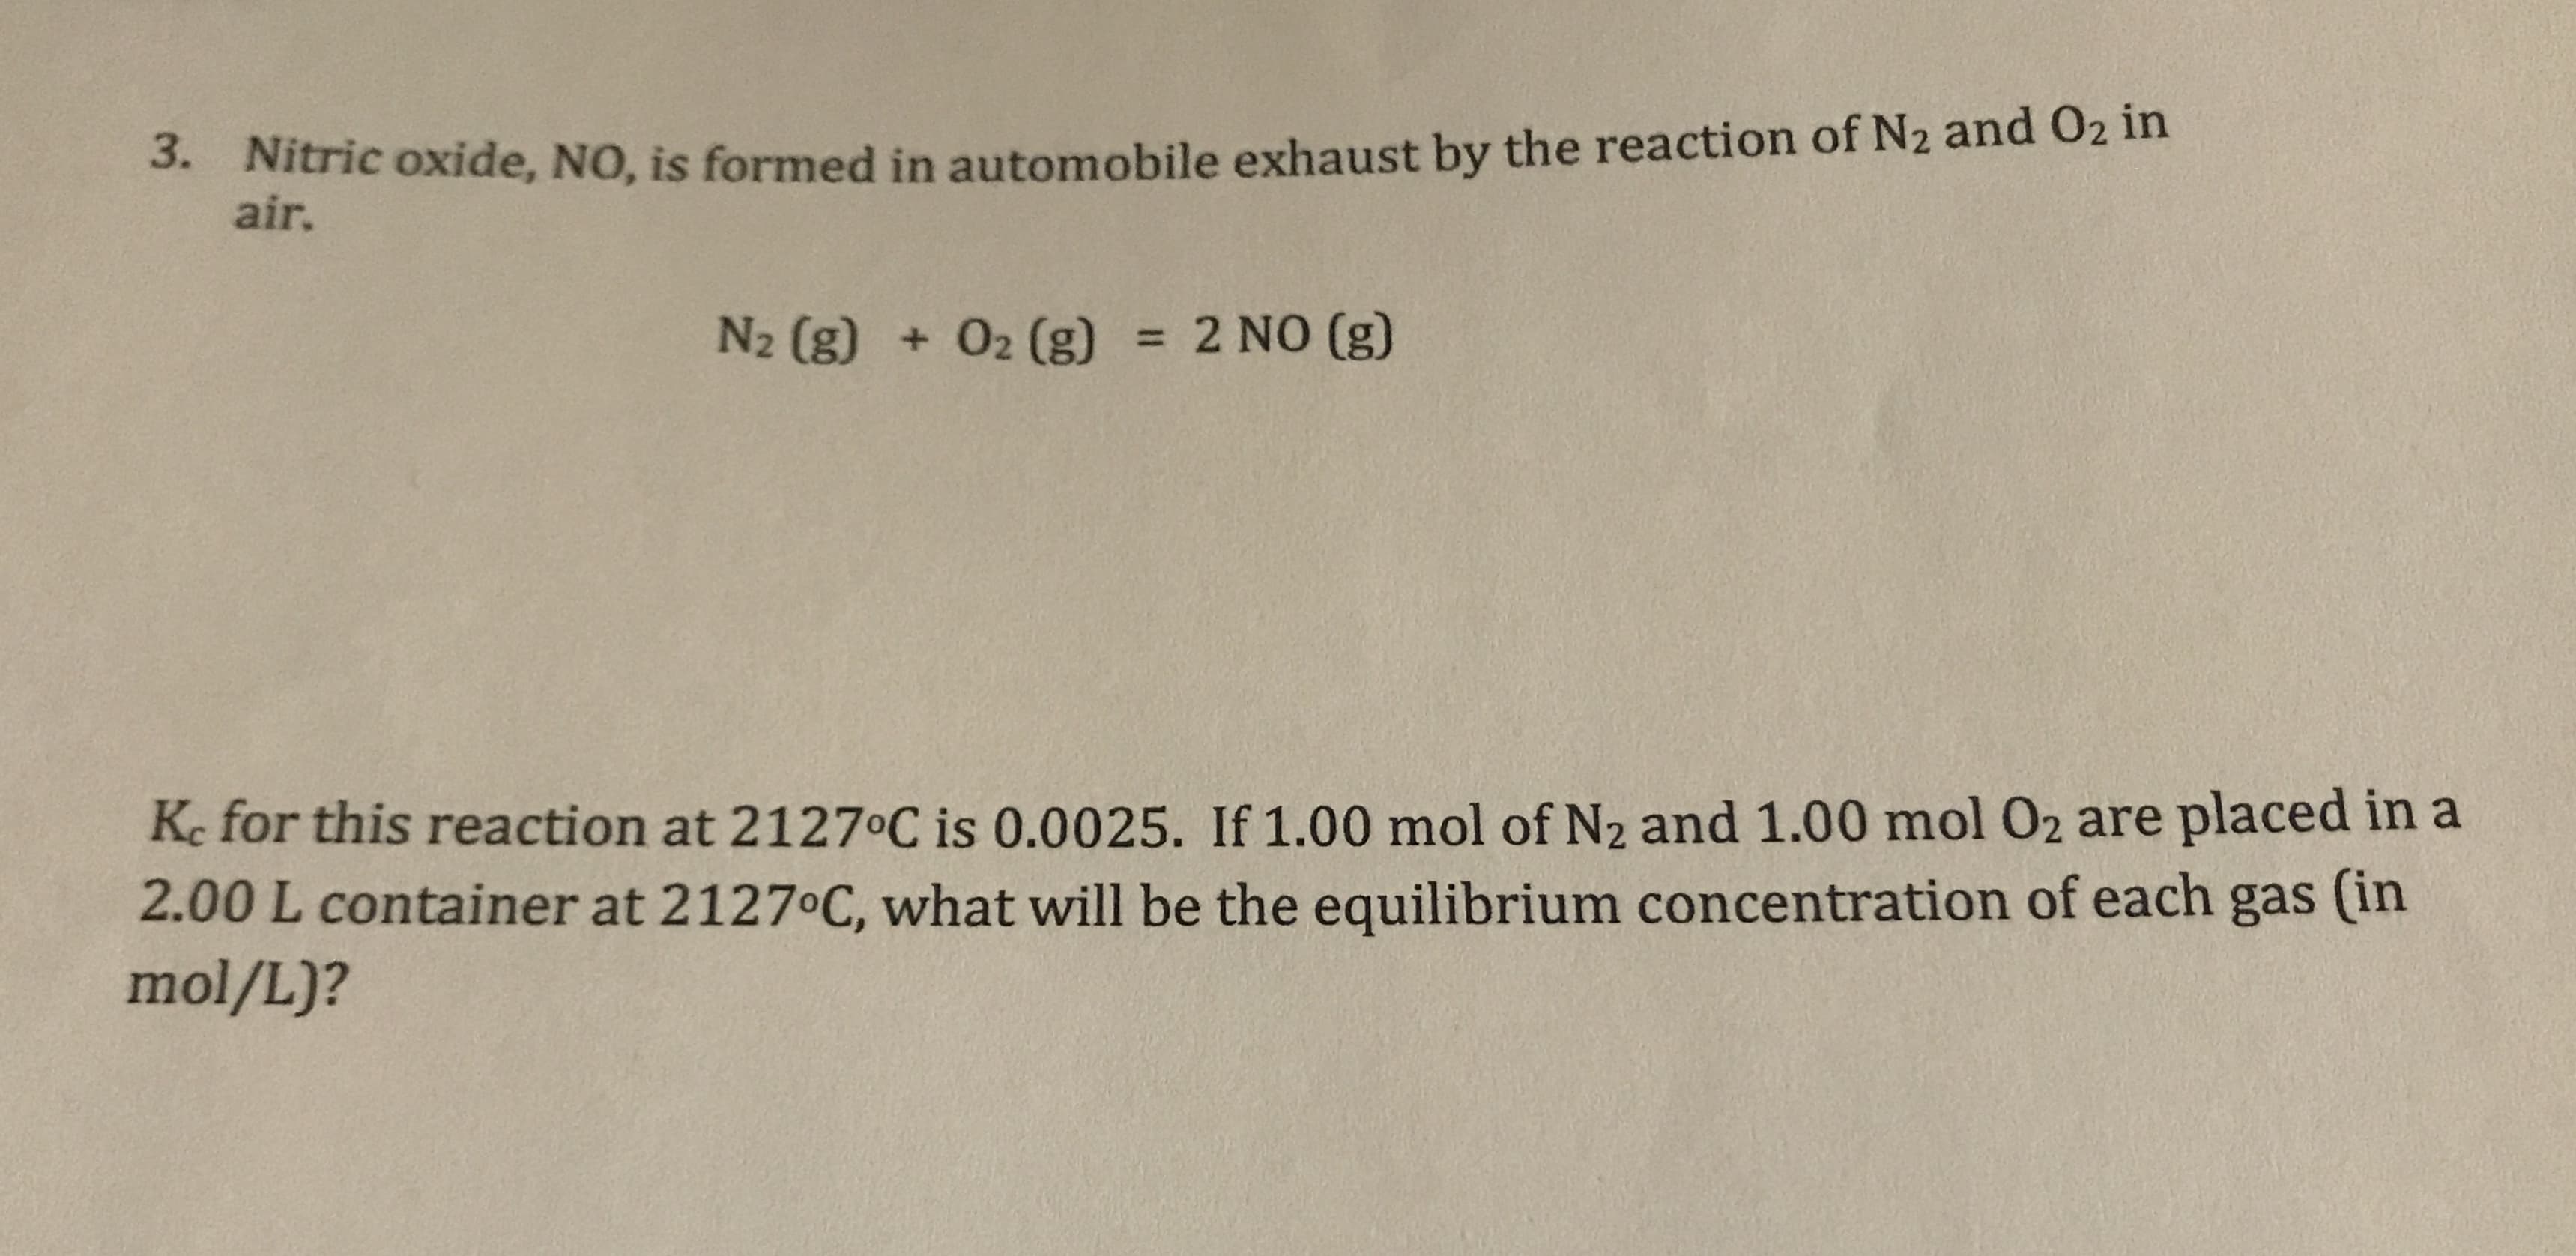 . Nitric oxide, NO, is formed in automobile exhaust by the reaction of N2 and O2 in
air.
N2 (g) +02 (g)
= 2 NO (g)
Ke for this reaction at 2127 C is 0.0025. If 1.00 mol of N2 and 1.00 mol 02 are placed in a
2.00 L container at 2127°C, what will be the equilibrium concentration of each gas (in
mol/L)?
